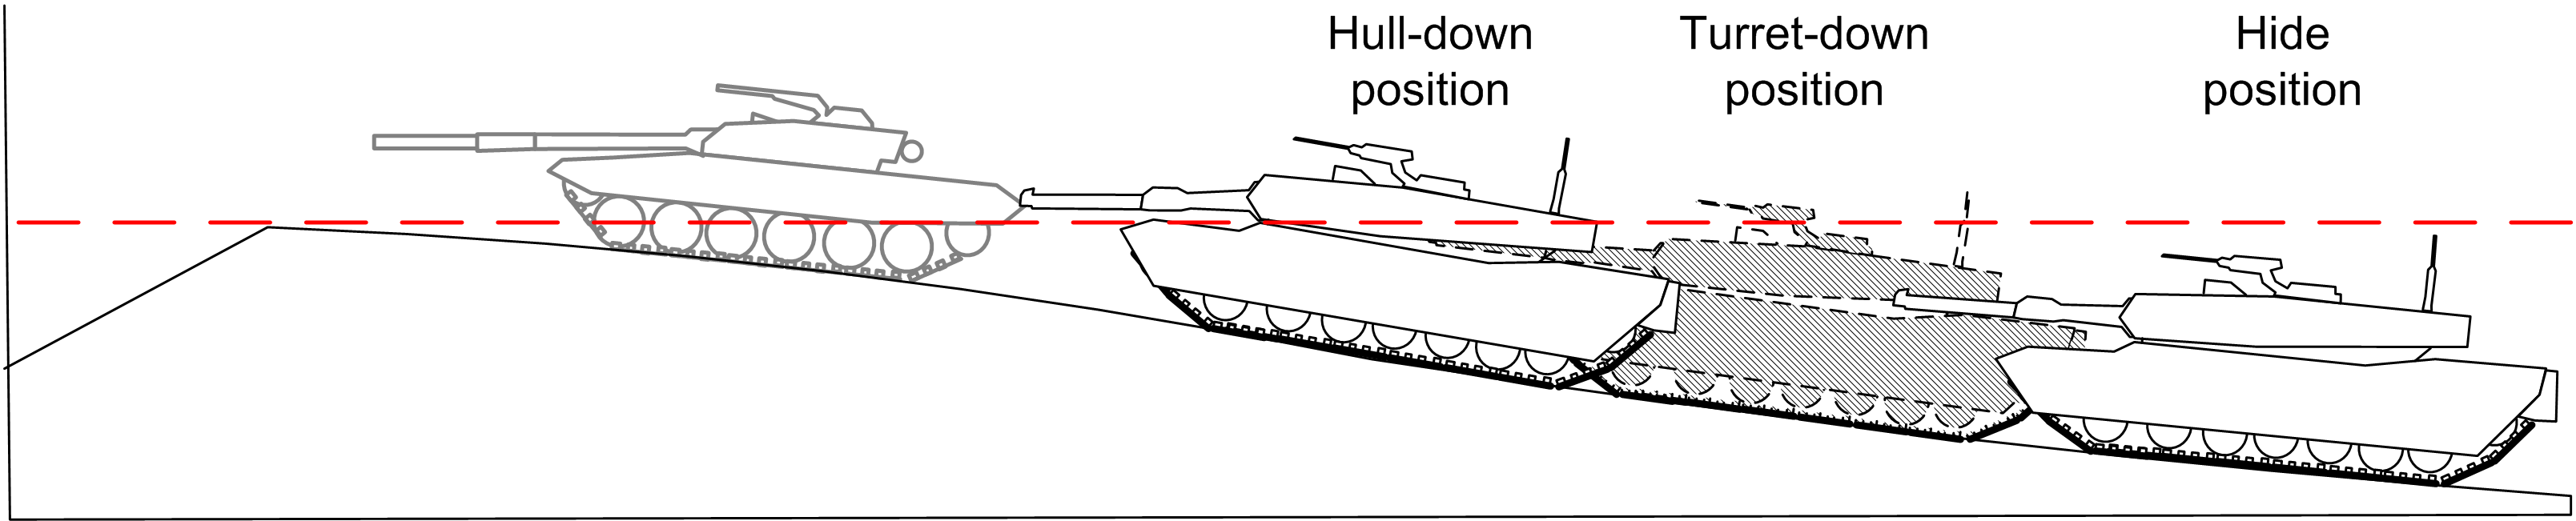 Examples of exposed, hull-down, turret-down and hide positions.